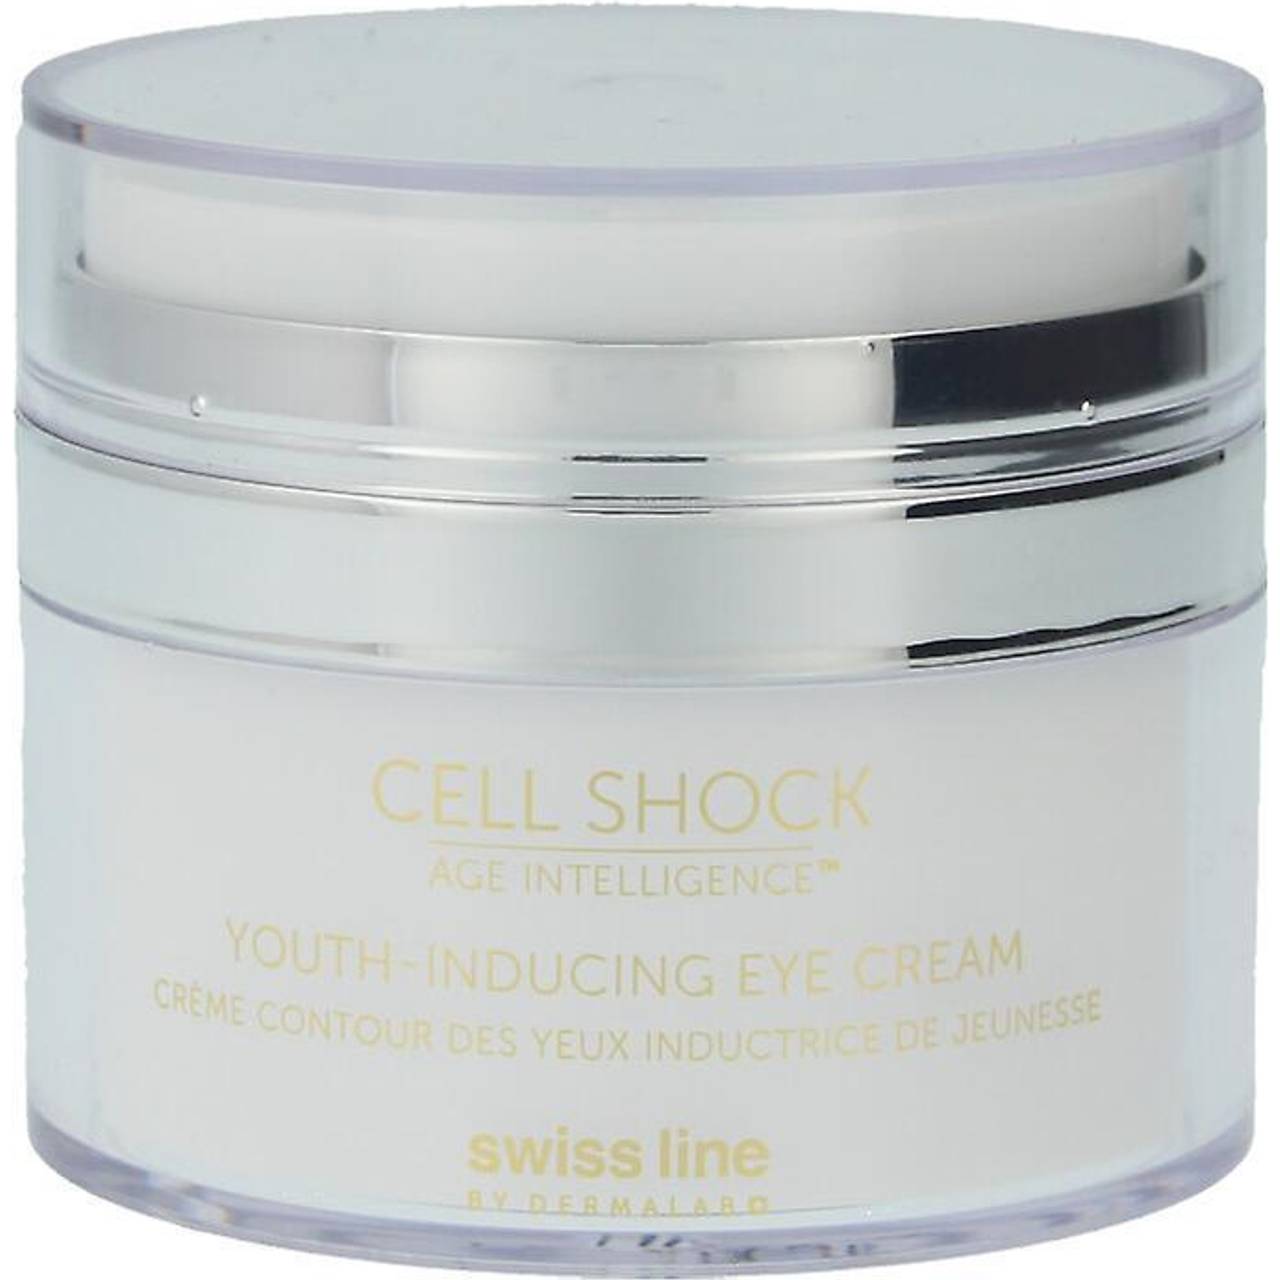 Swissline Anti-Ageing Cream for Eye Area Cell Shock 15ml • Price